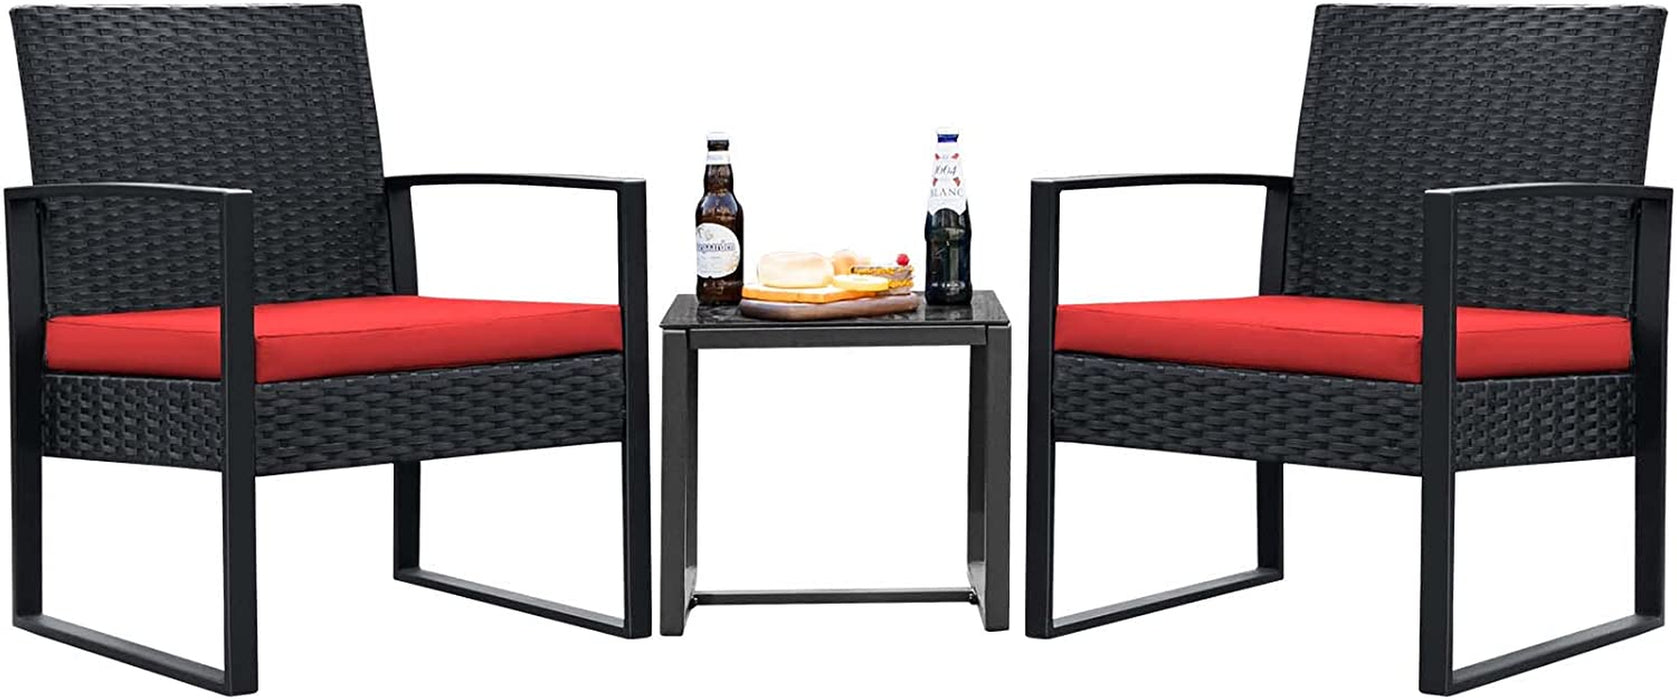 3 Pieces Patio Set Outdoor Wicker Patio Furniture Sets Modern Bistro Set Rattan Chair Conversation Sets with Coffee Table for Yard and Bistro (Black)